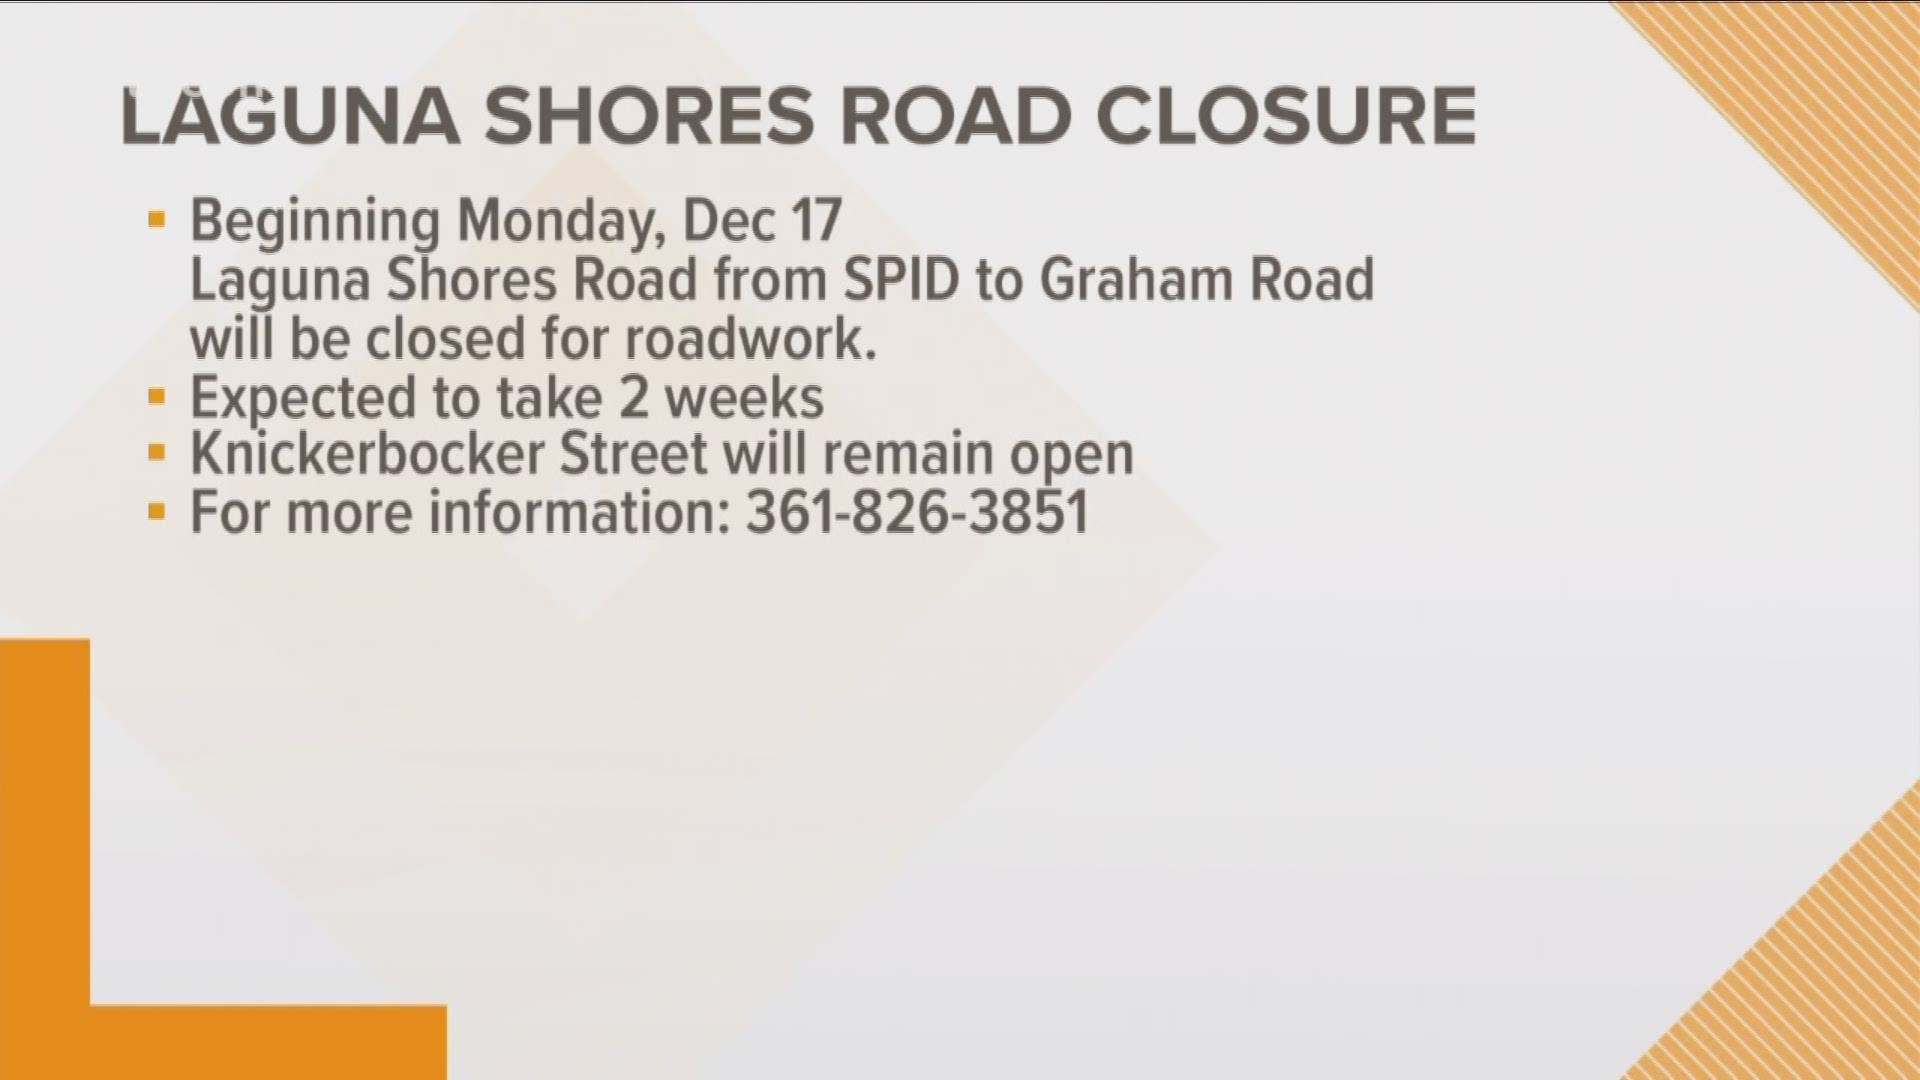 Drivers can expect roadwork to cause delays for about 2 weeks on Laguna Shores Rd.